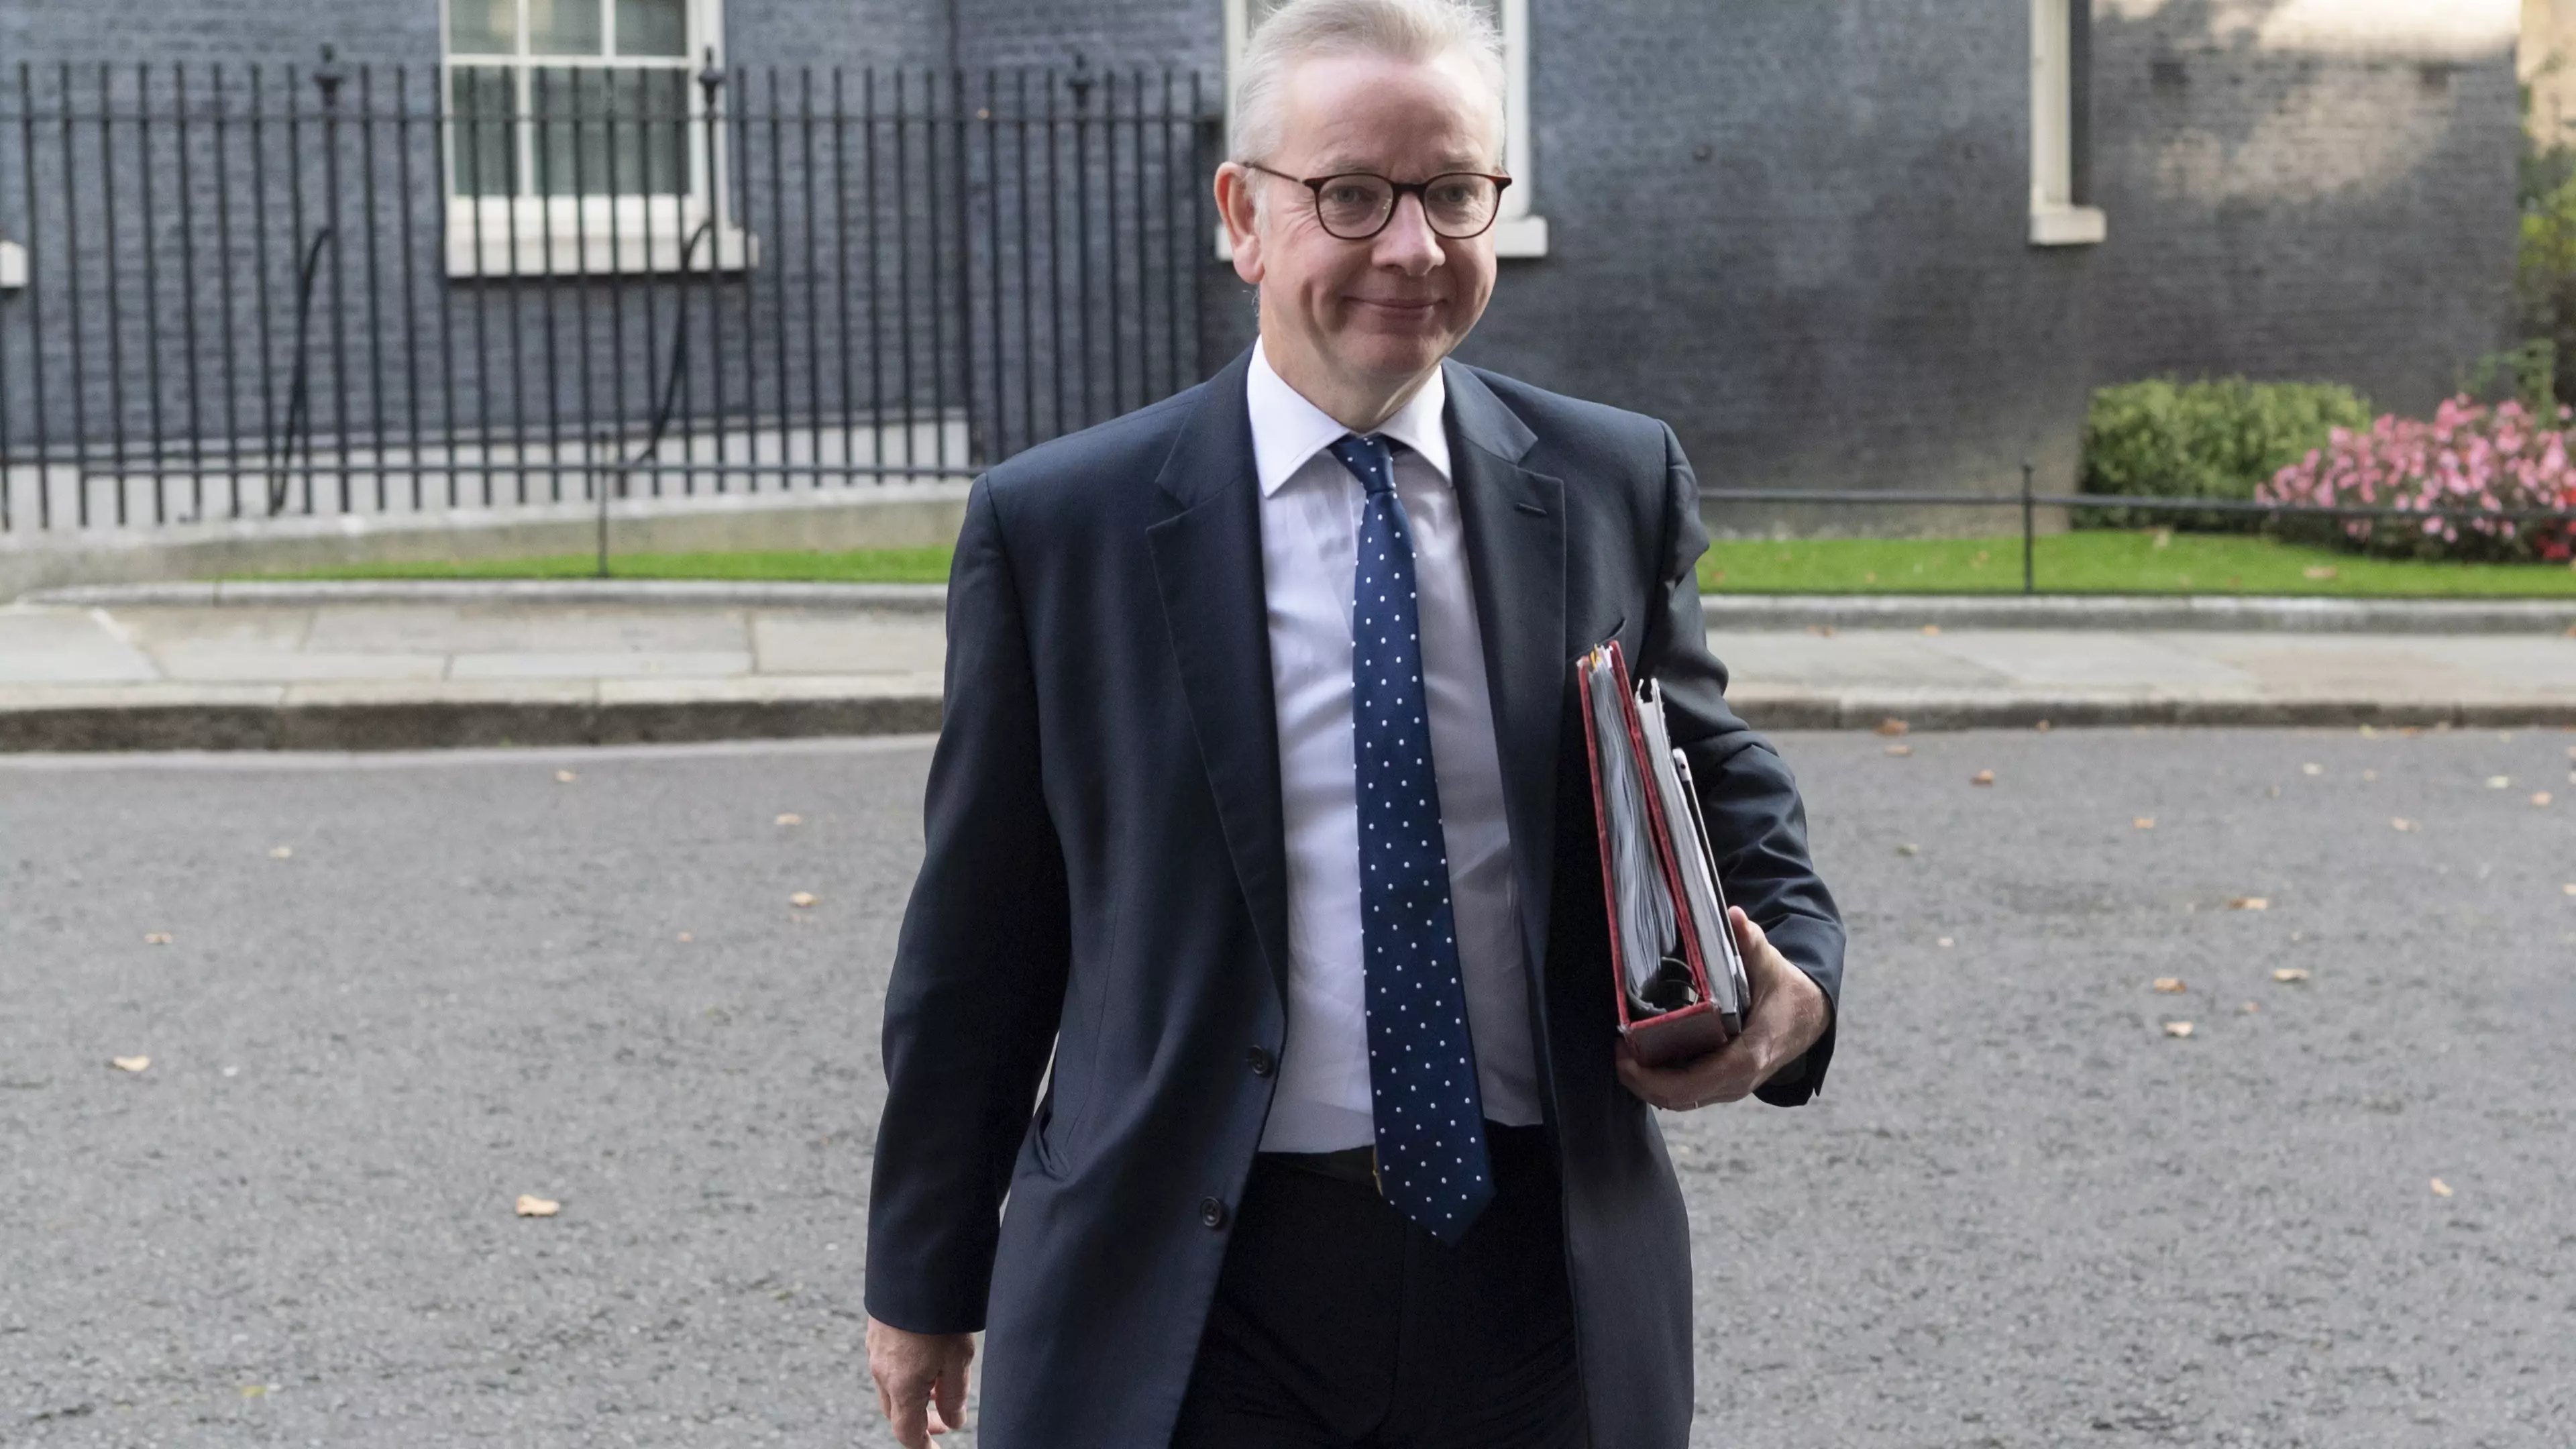  'Work From Home If You Can' Says Michael Gove Ahead Of New Restrictions